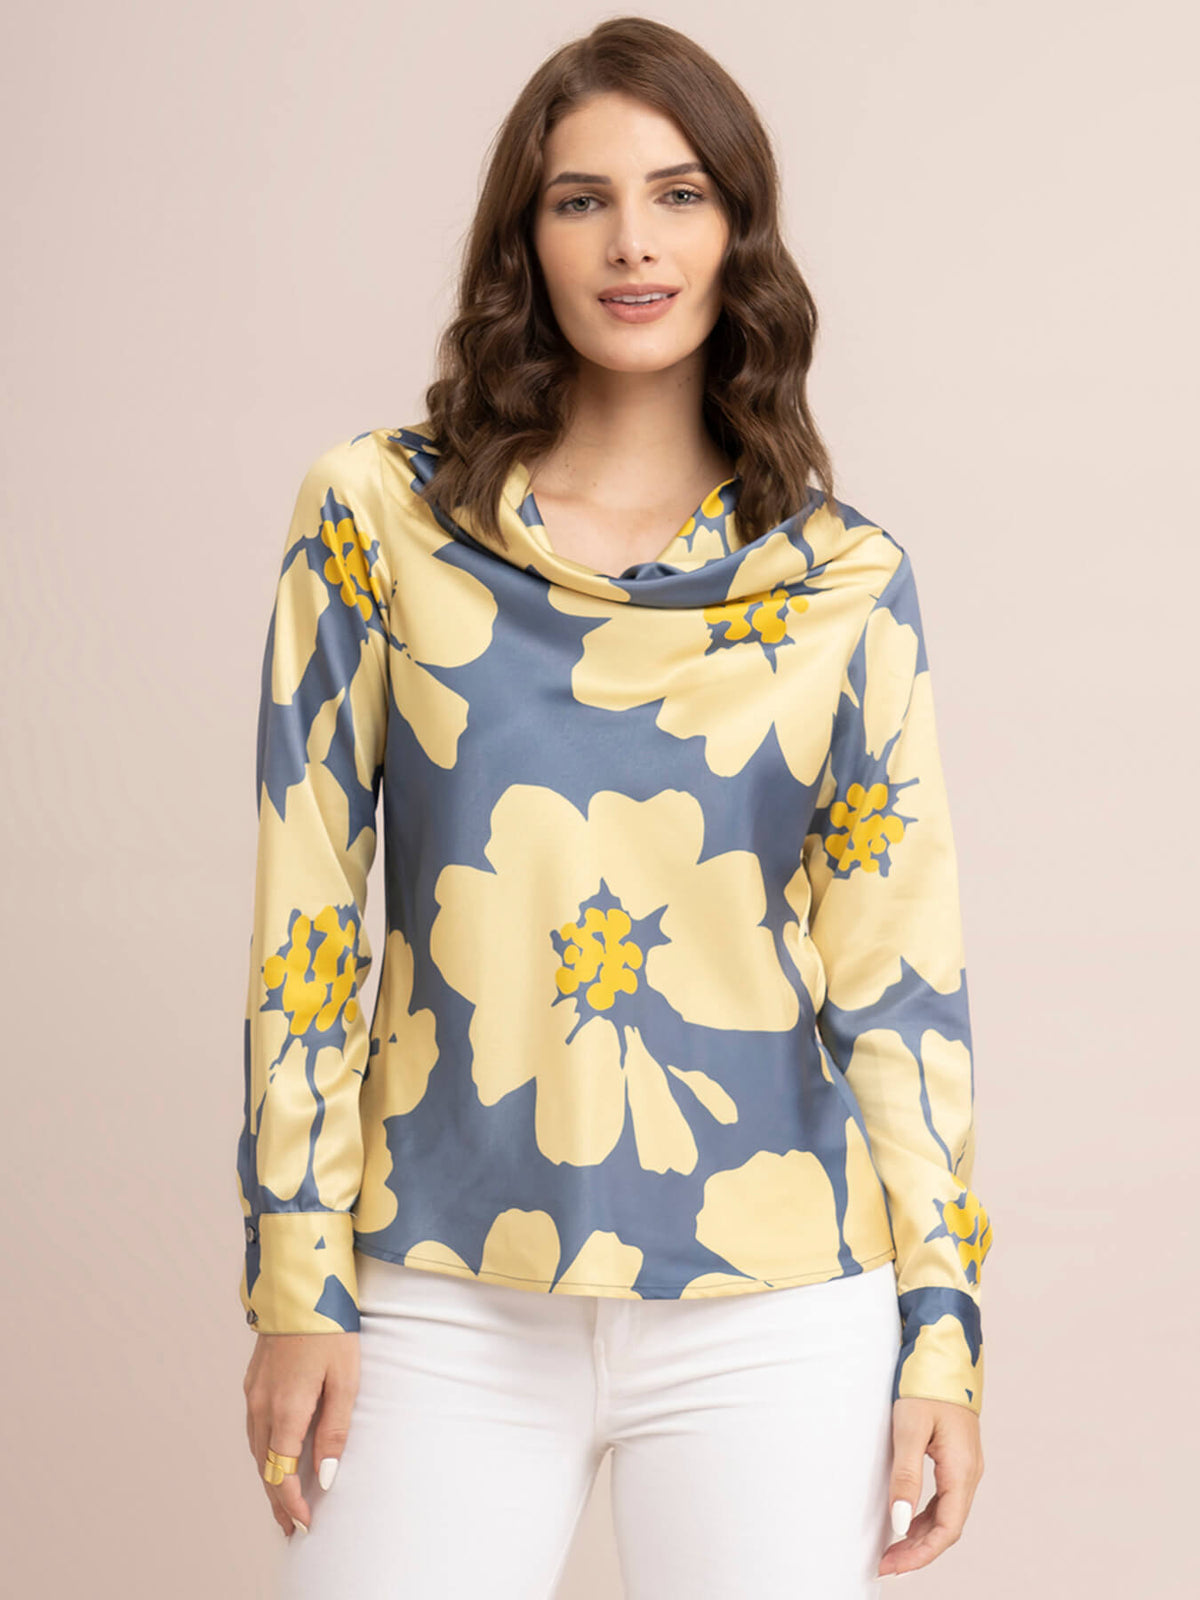 Floral Top - Yellow and Grey